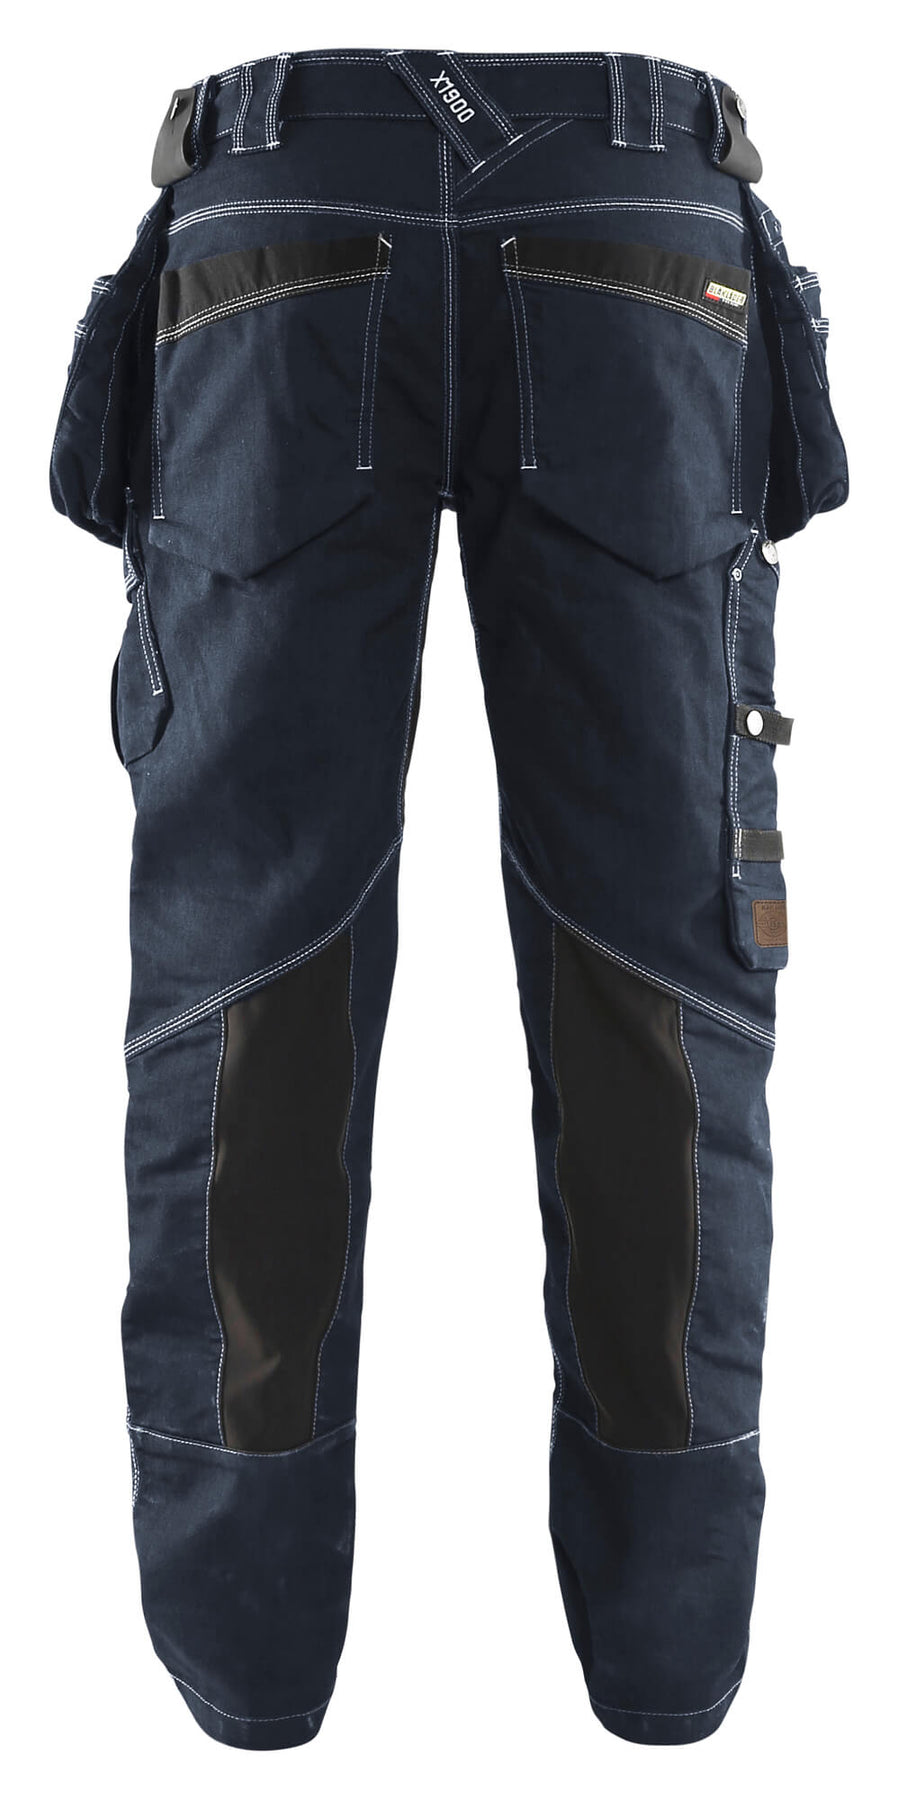 BLAKLADER WORKWEAR Trousers | 1790 Black/ Black Craftsman Cotton Trousers  with Holster Pockets